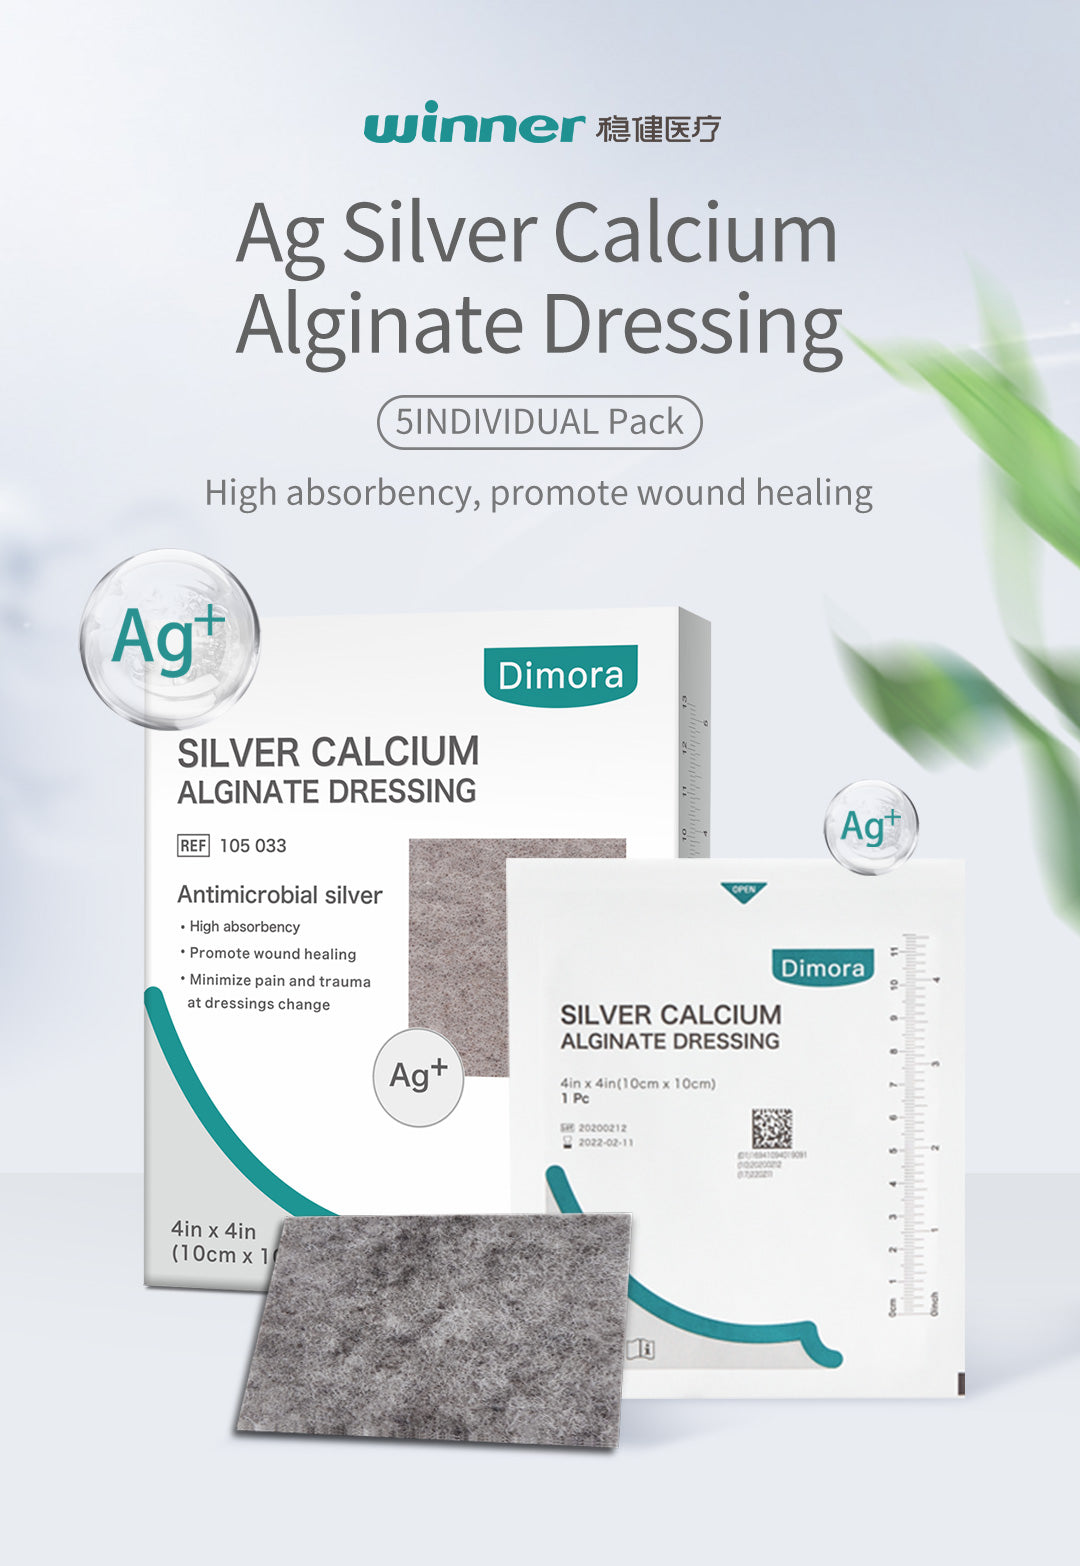 Ag Silver Calcium Alginate Dressing: High absorbency, promote wound healing